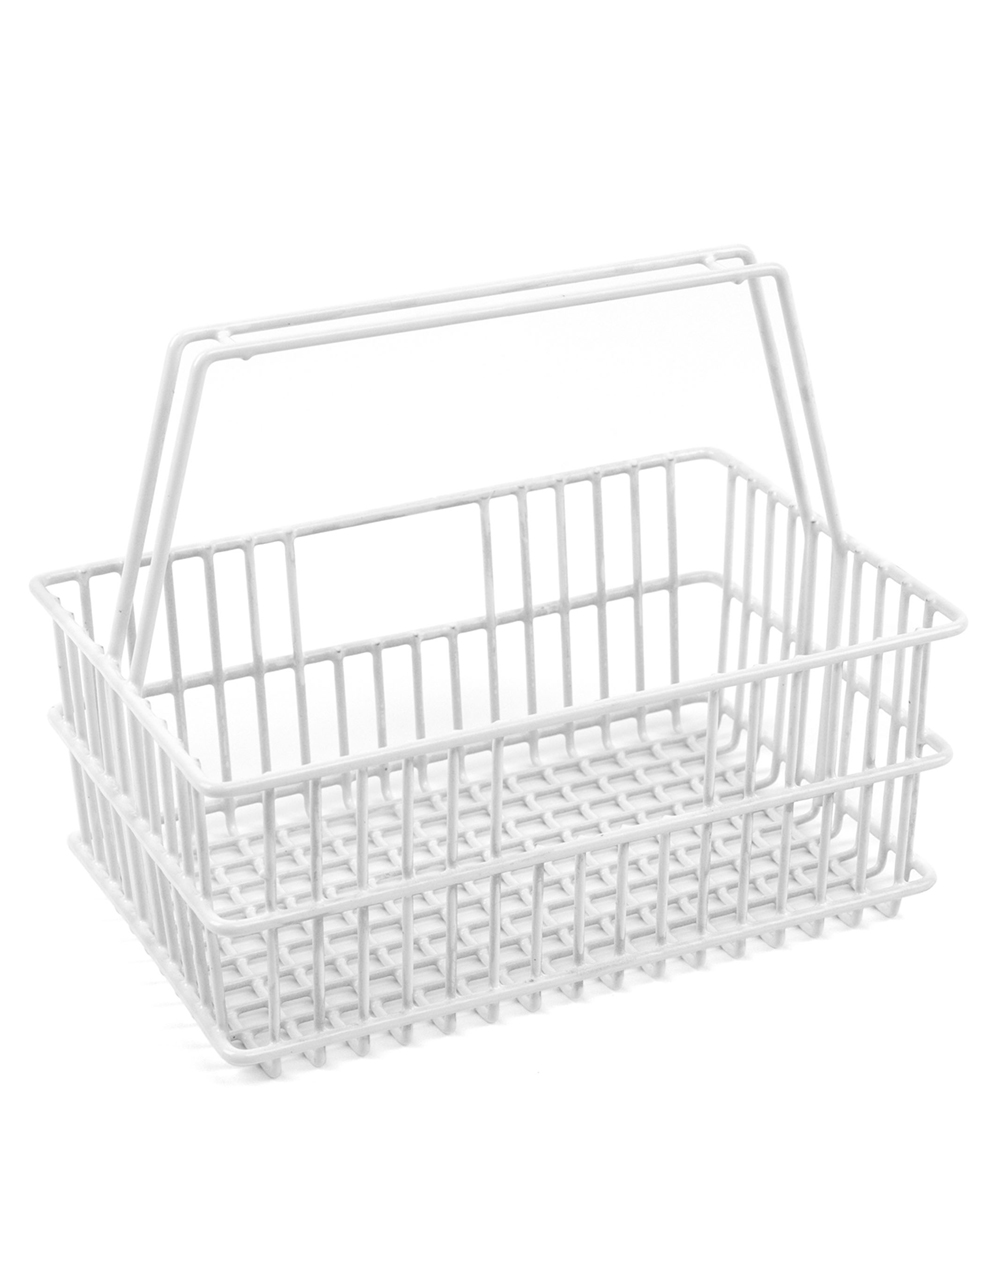 LaCrate Small Basket